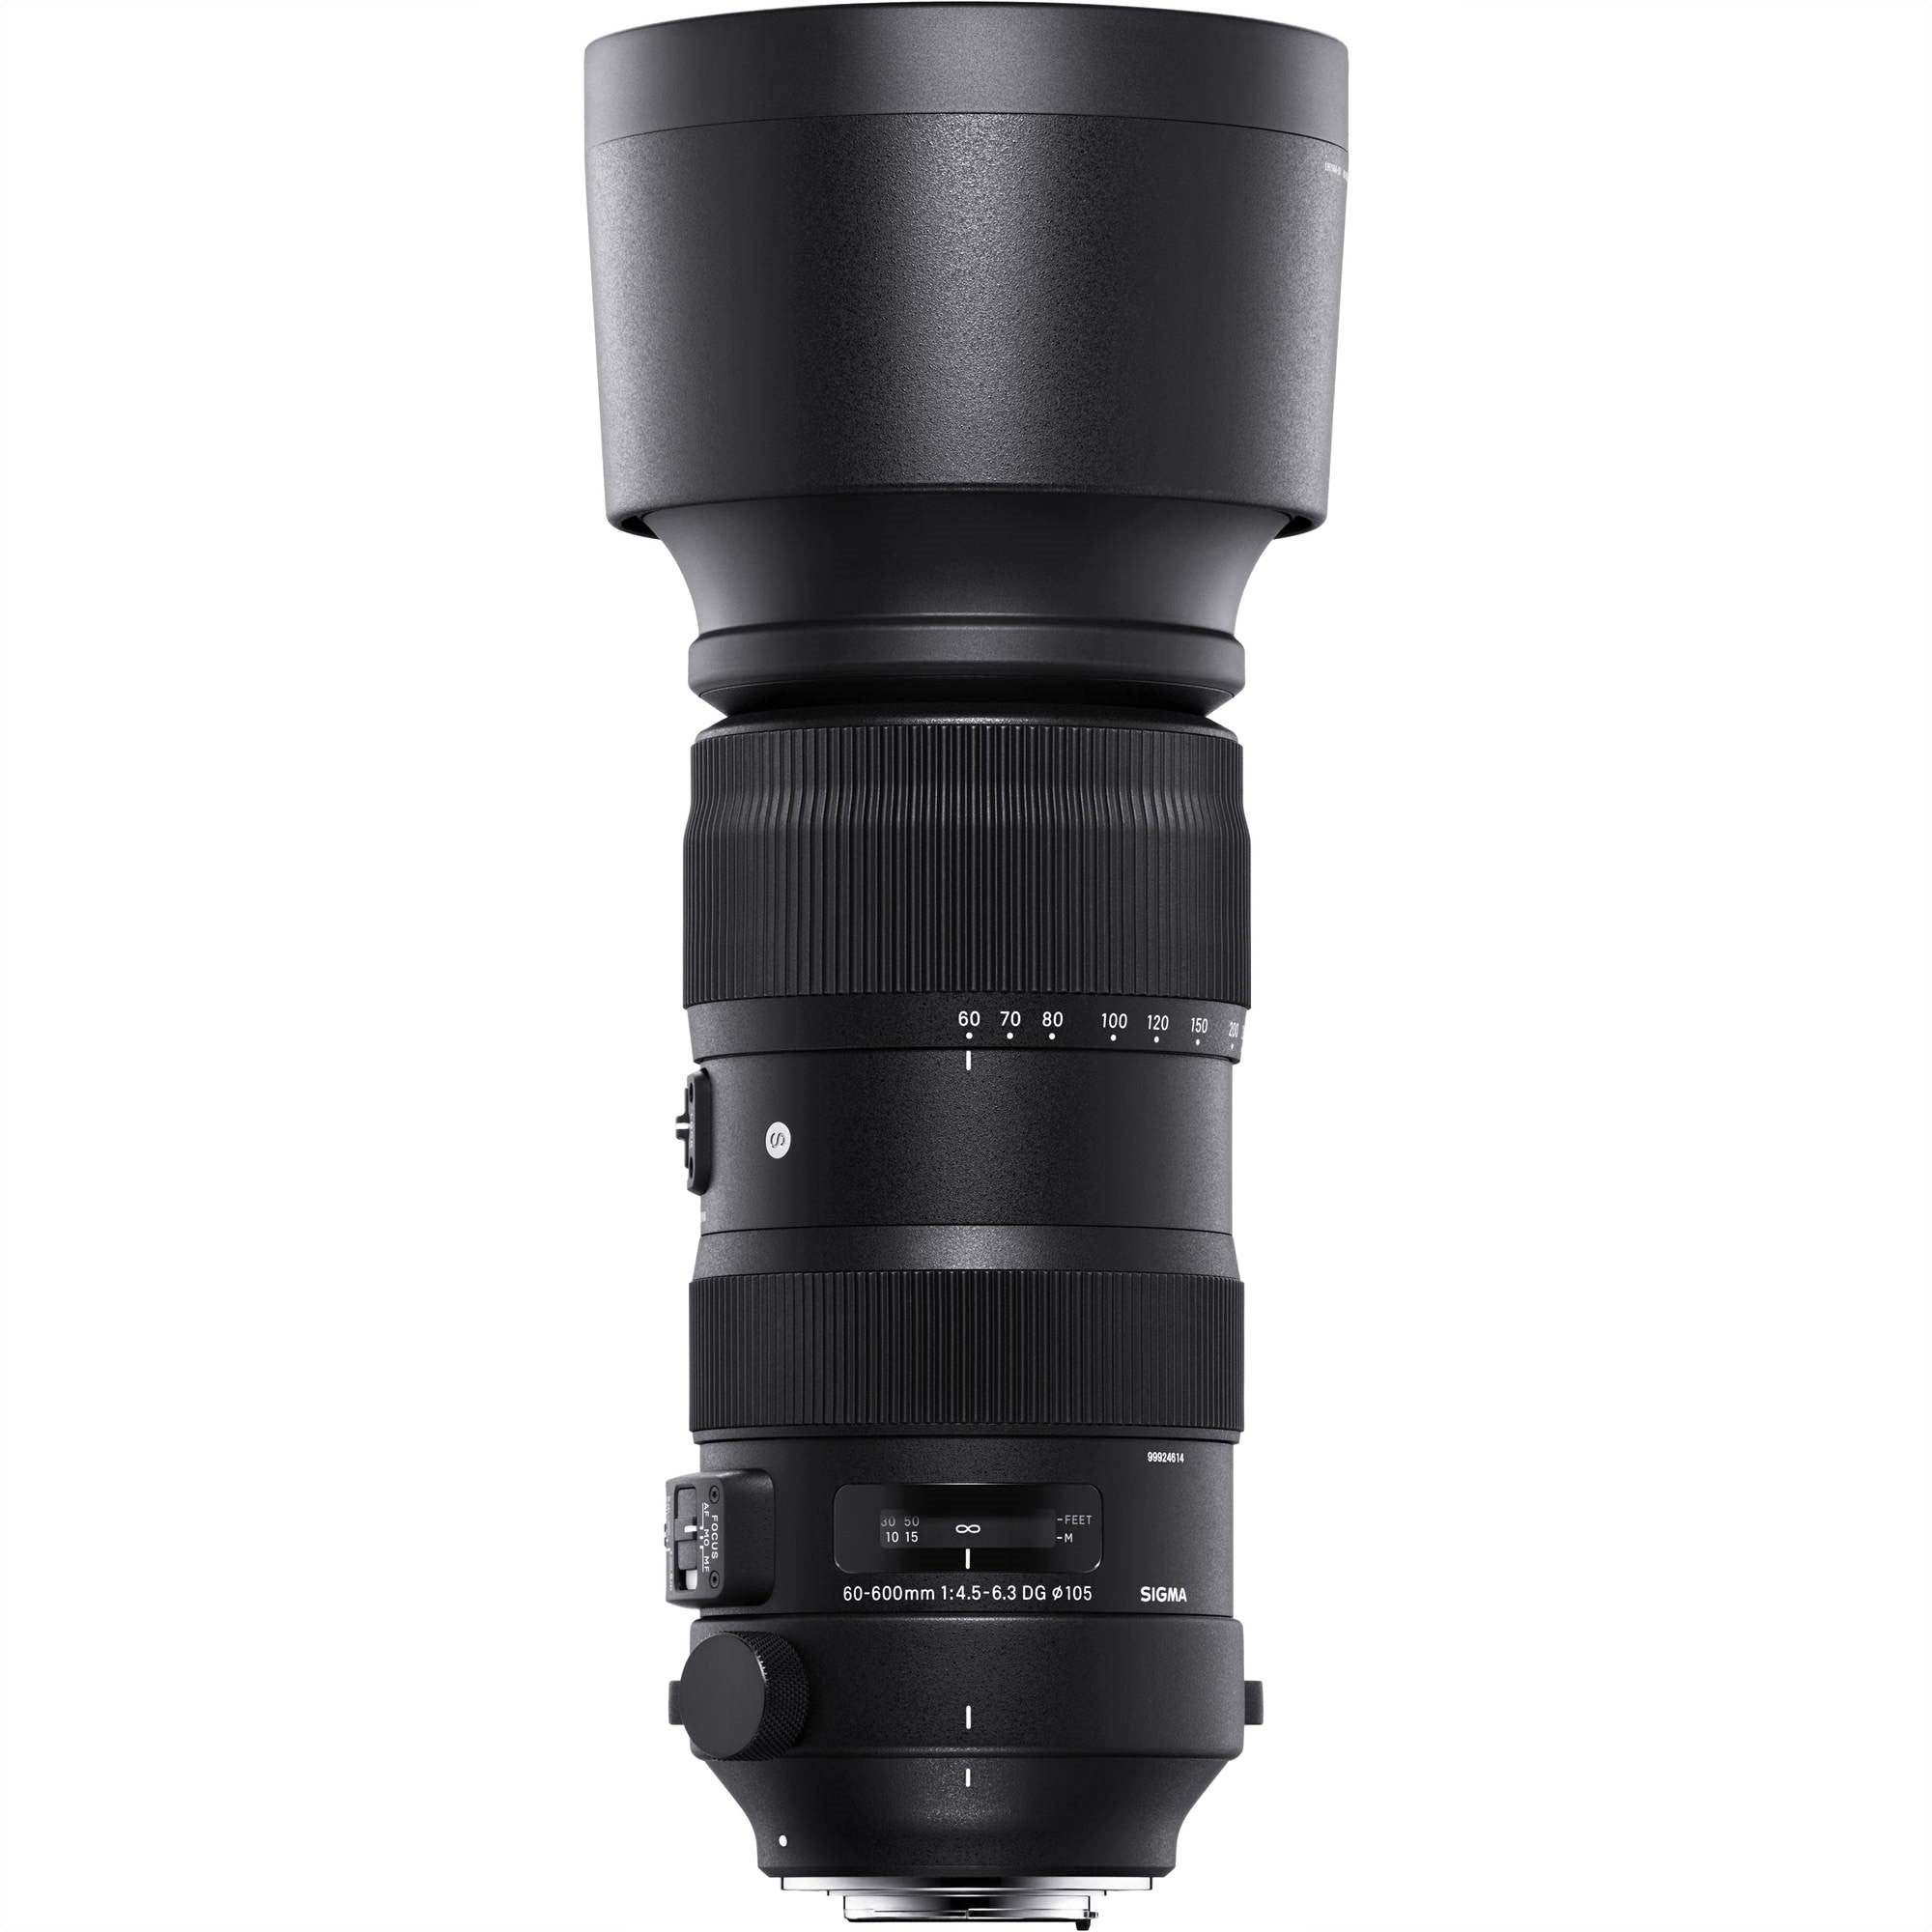 Sigma 60-600mm F4.5-6.3 DG OS HSM Sports Lens for Sigma SA with Attached Lens Hood on the Top